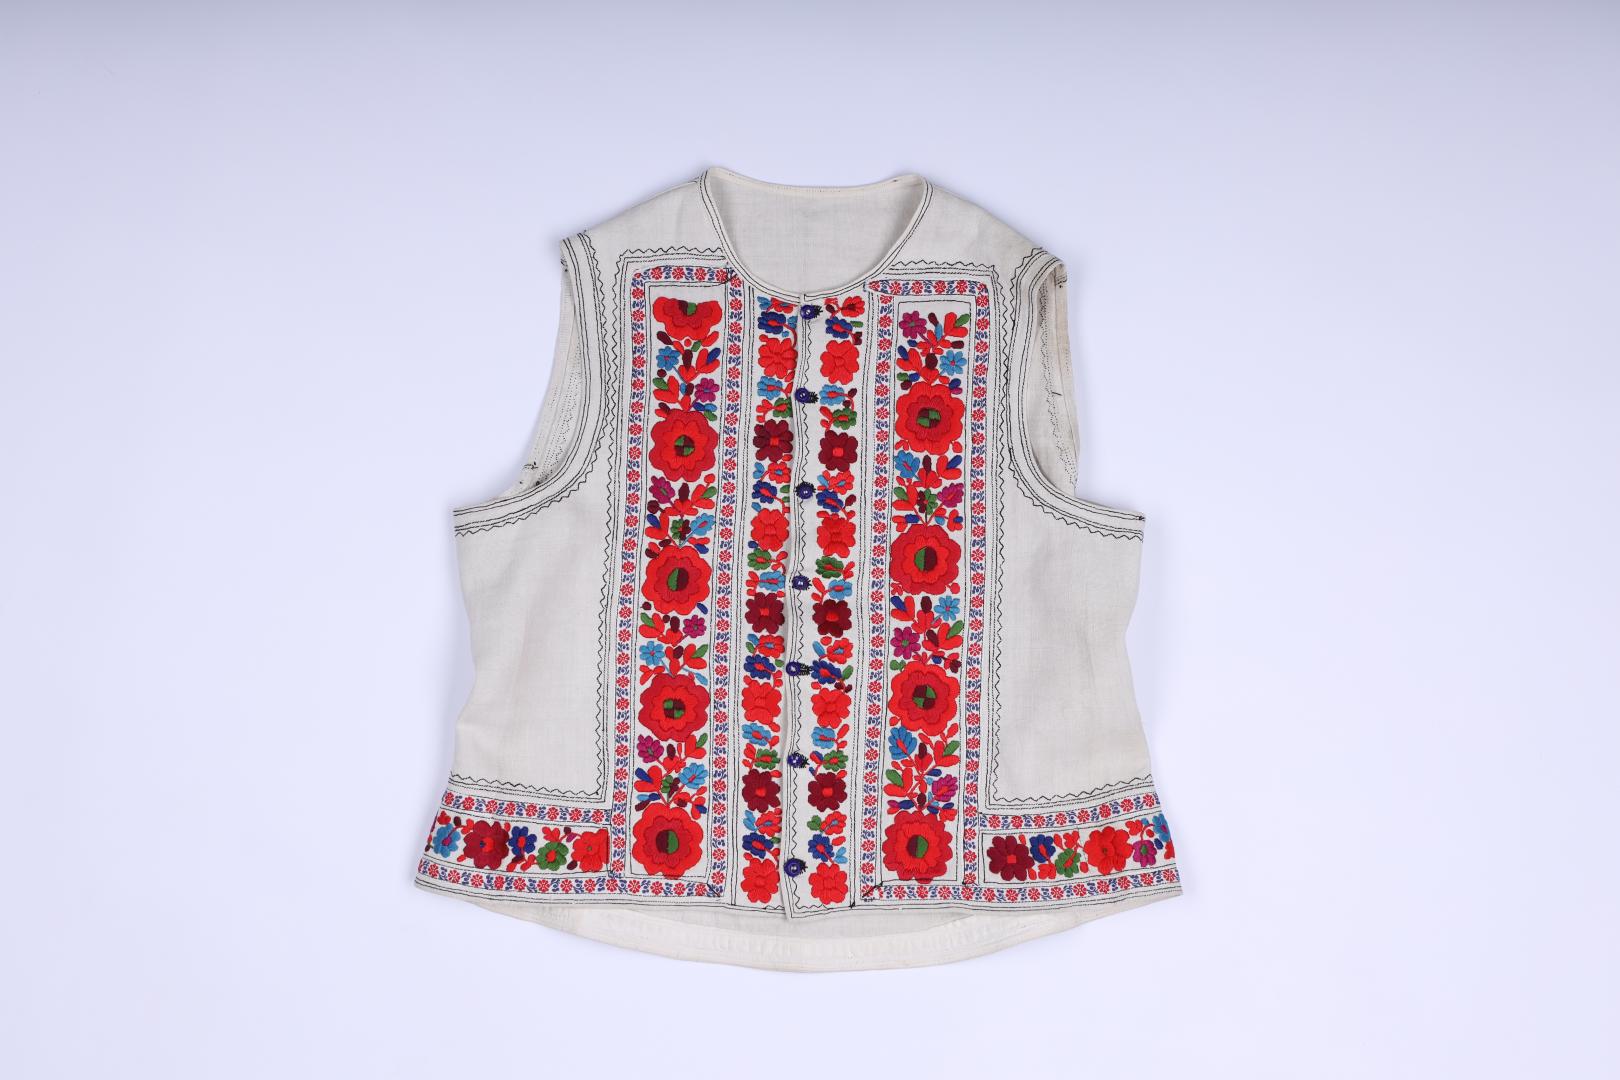 Kabat (jacket) embroidered with flowers